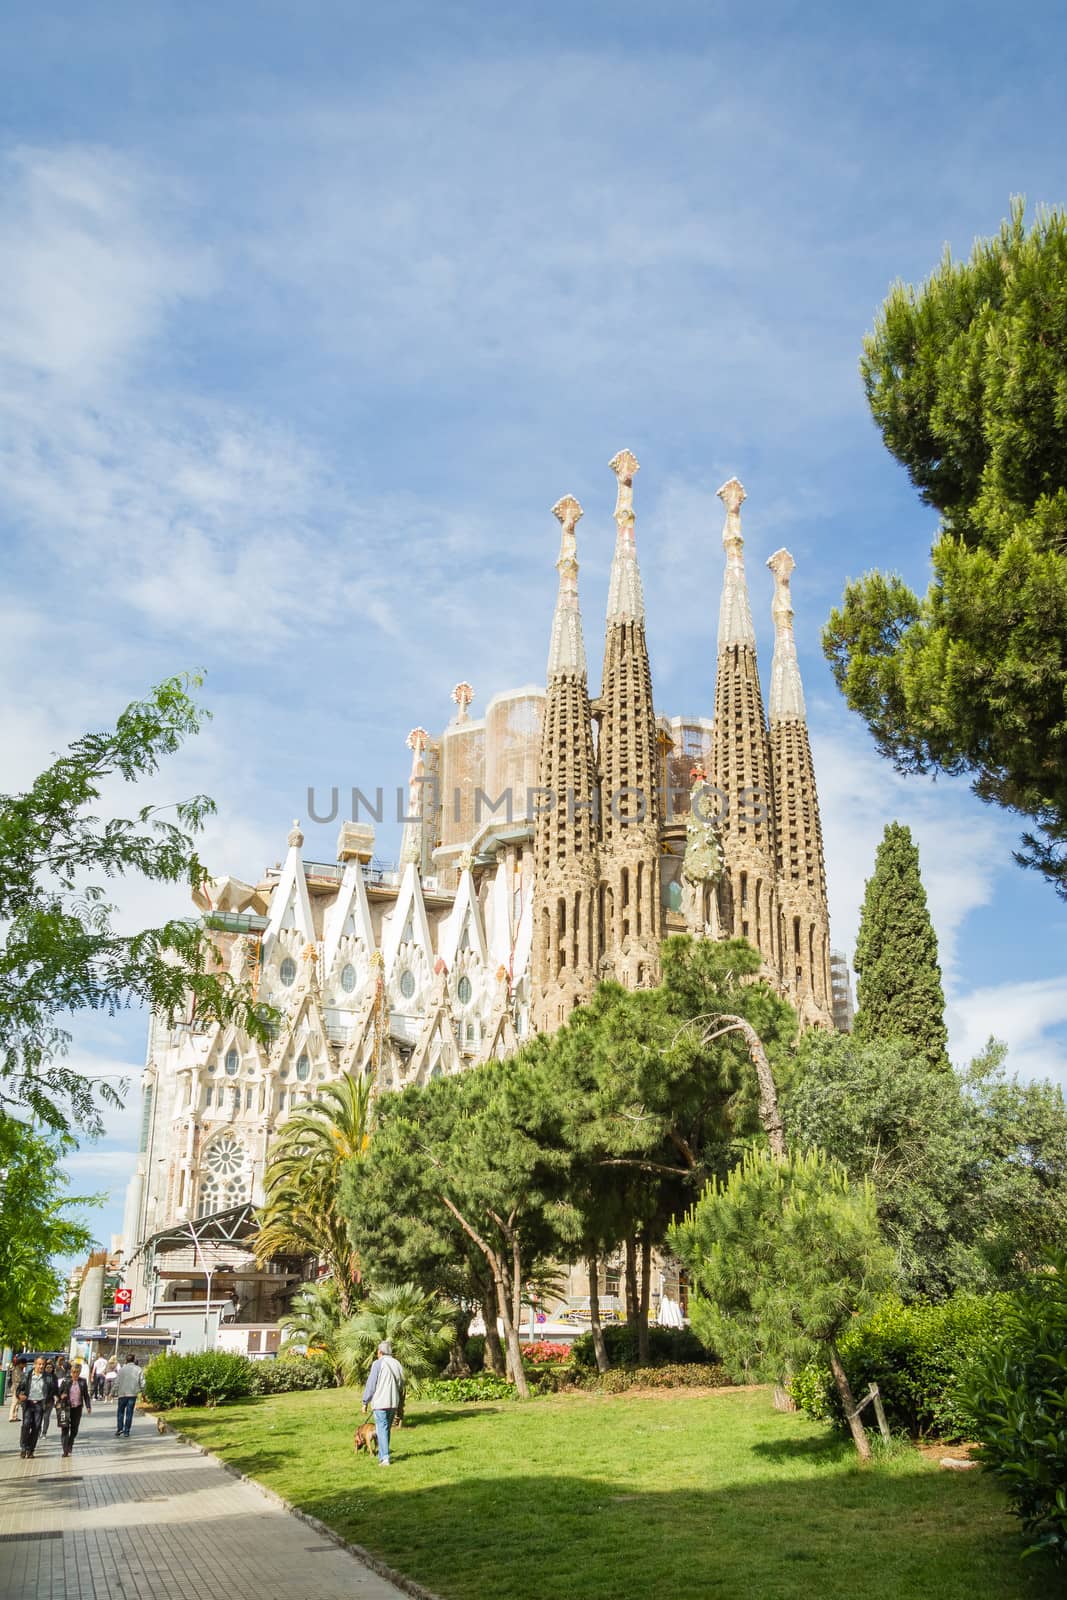 BARCELONA, SPAIN - JUNE 01 View of the Sagrada Familia cathedral, designed by Antoni Gaudi, in Barcelona, Spain, on June 01, 2013. It is a church with a modernist architecture, initiated in 1882, and still under construction